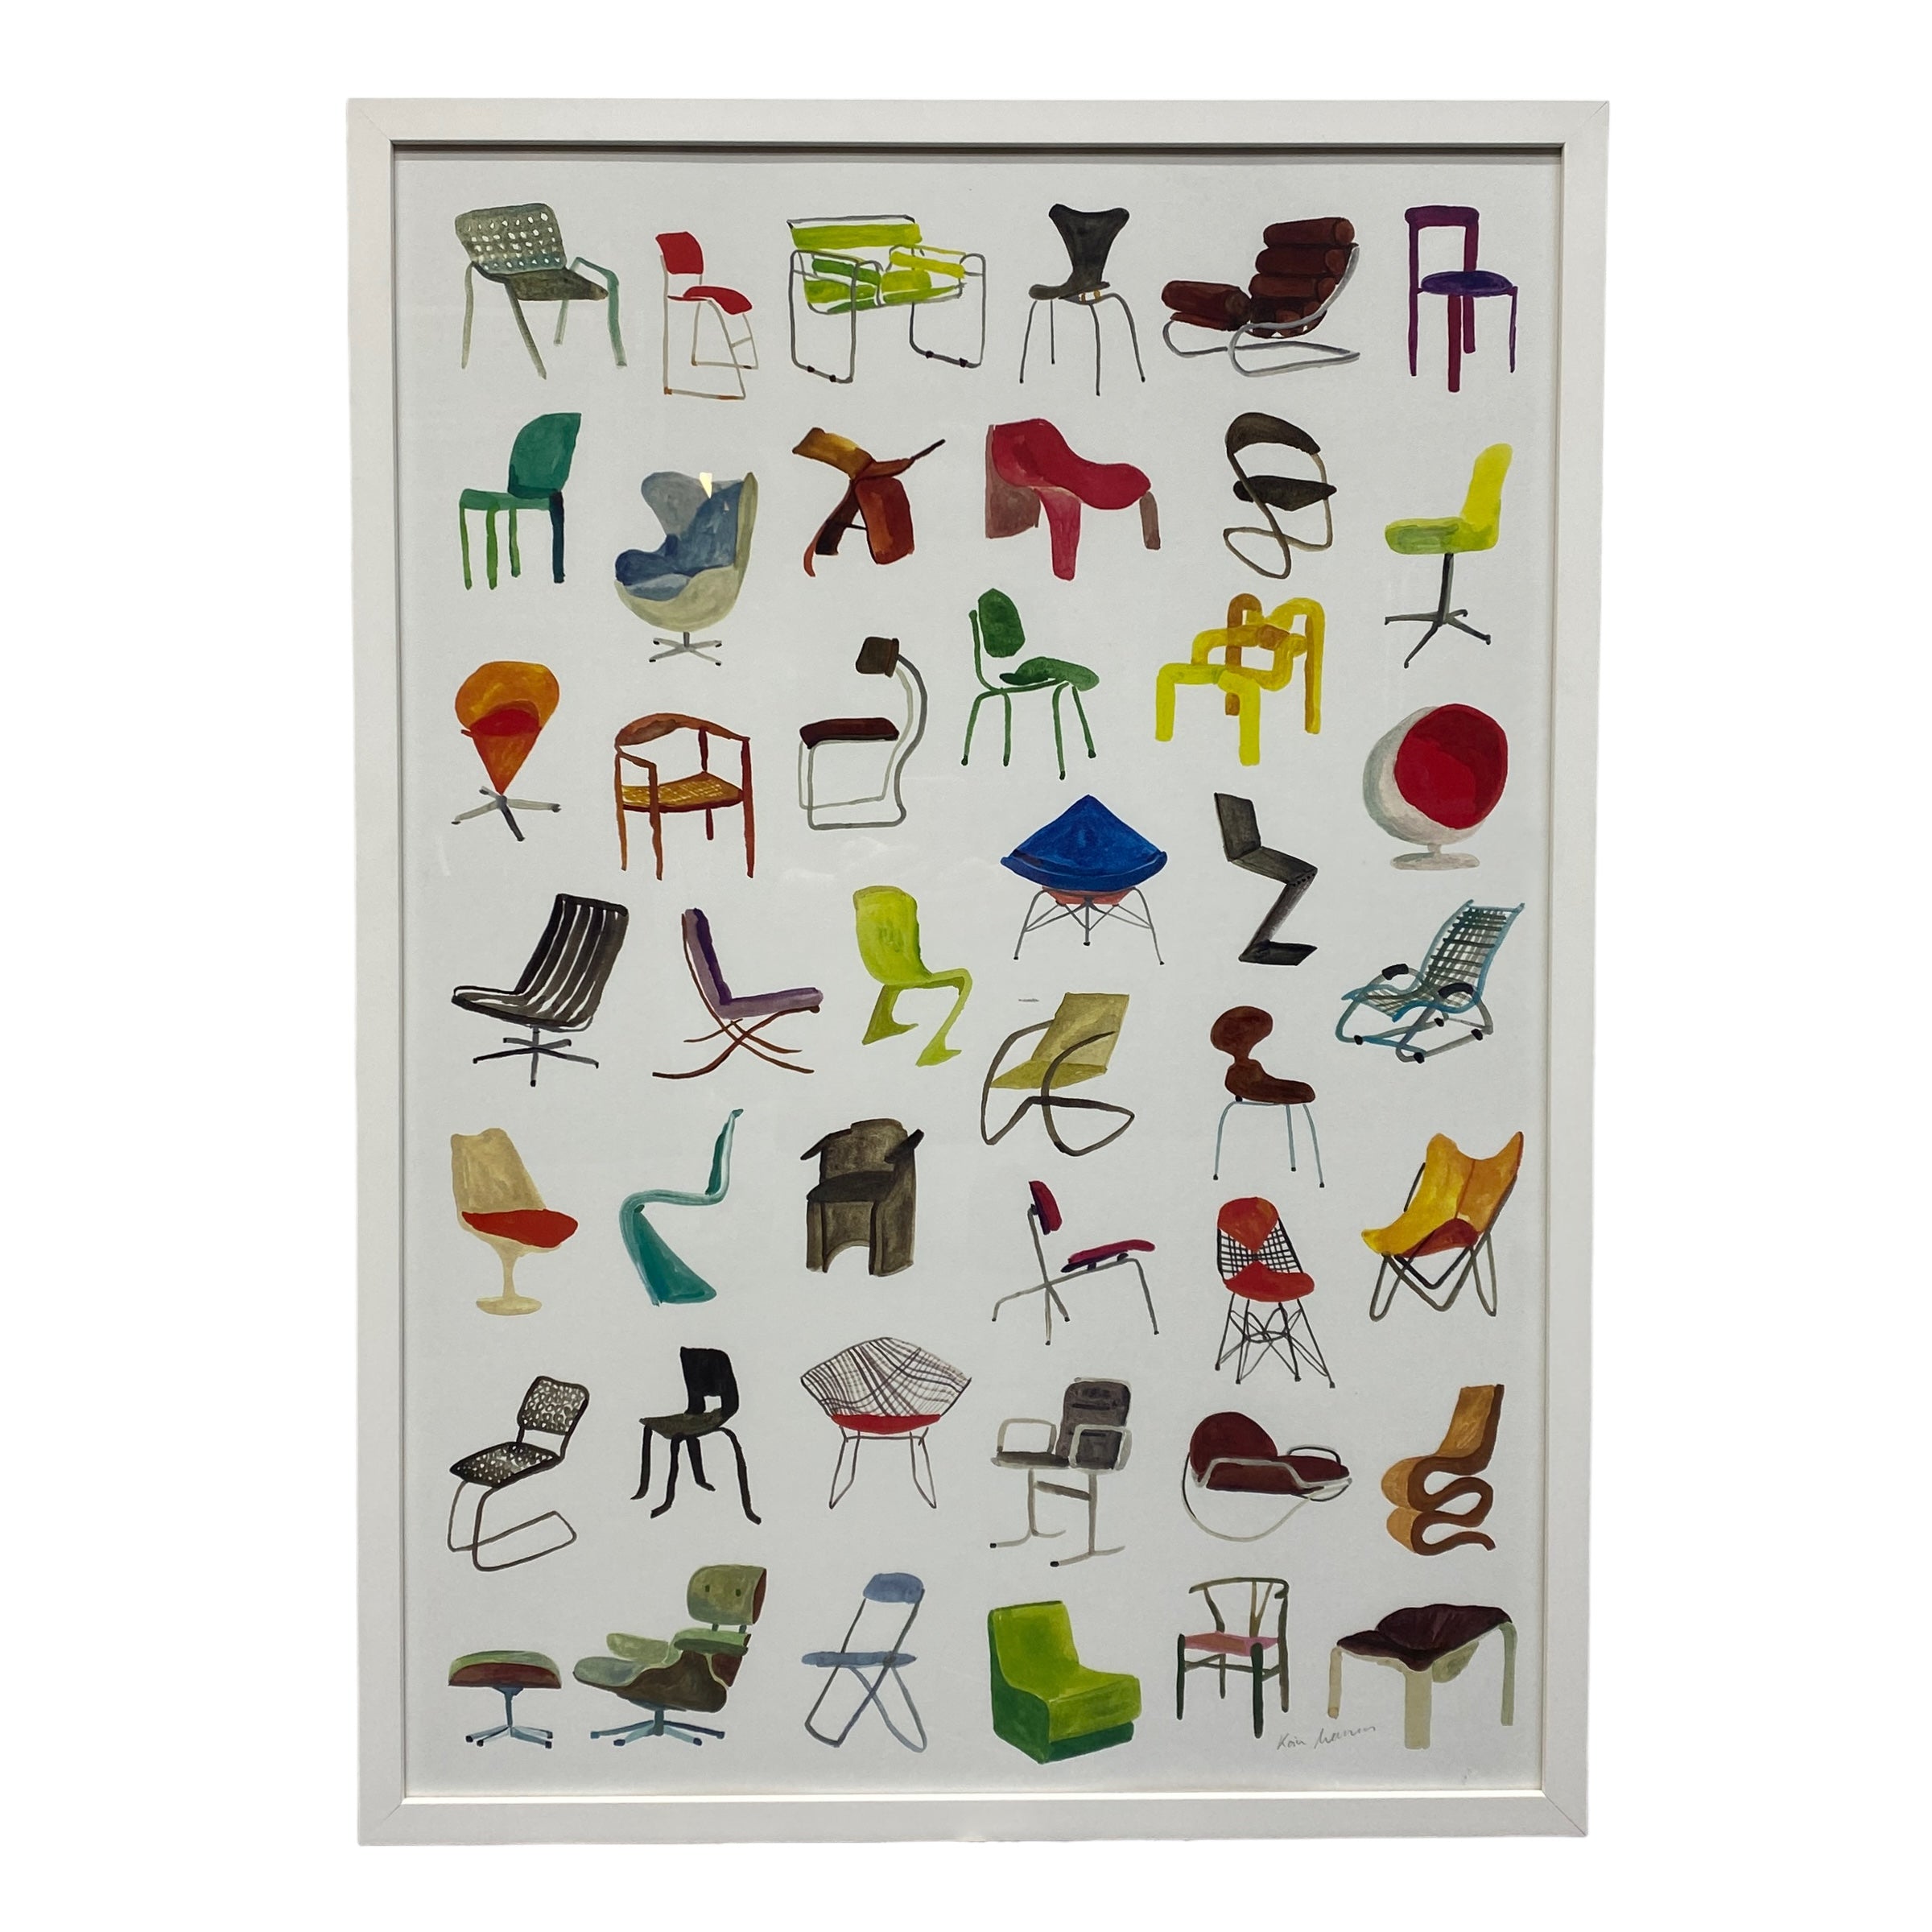 Statement chair Poster Framed